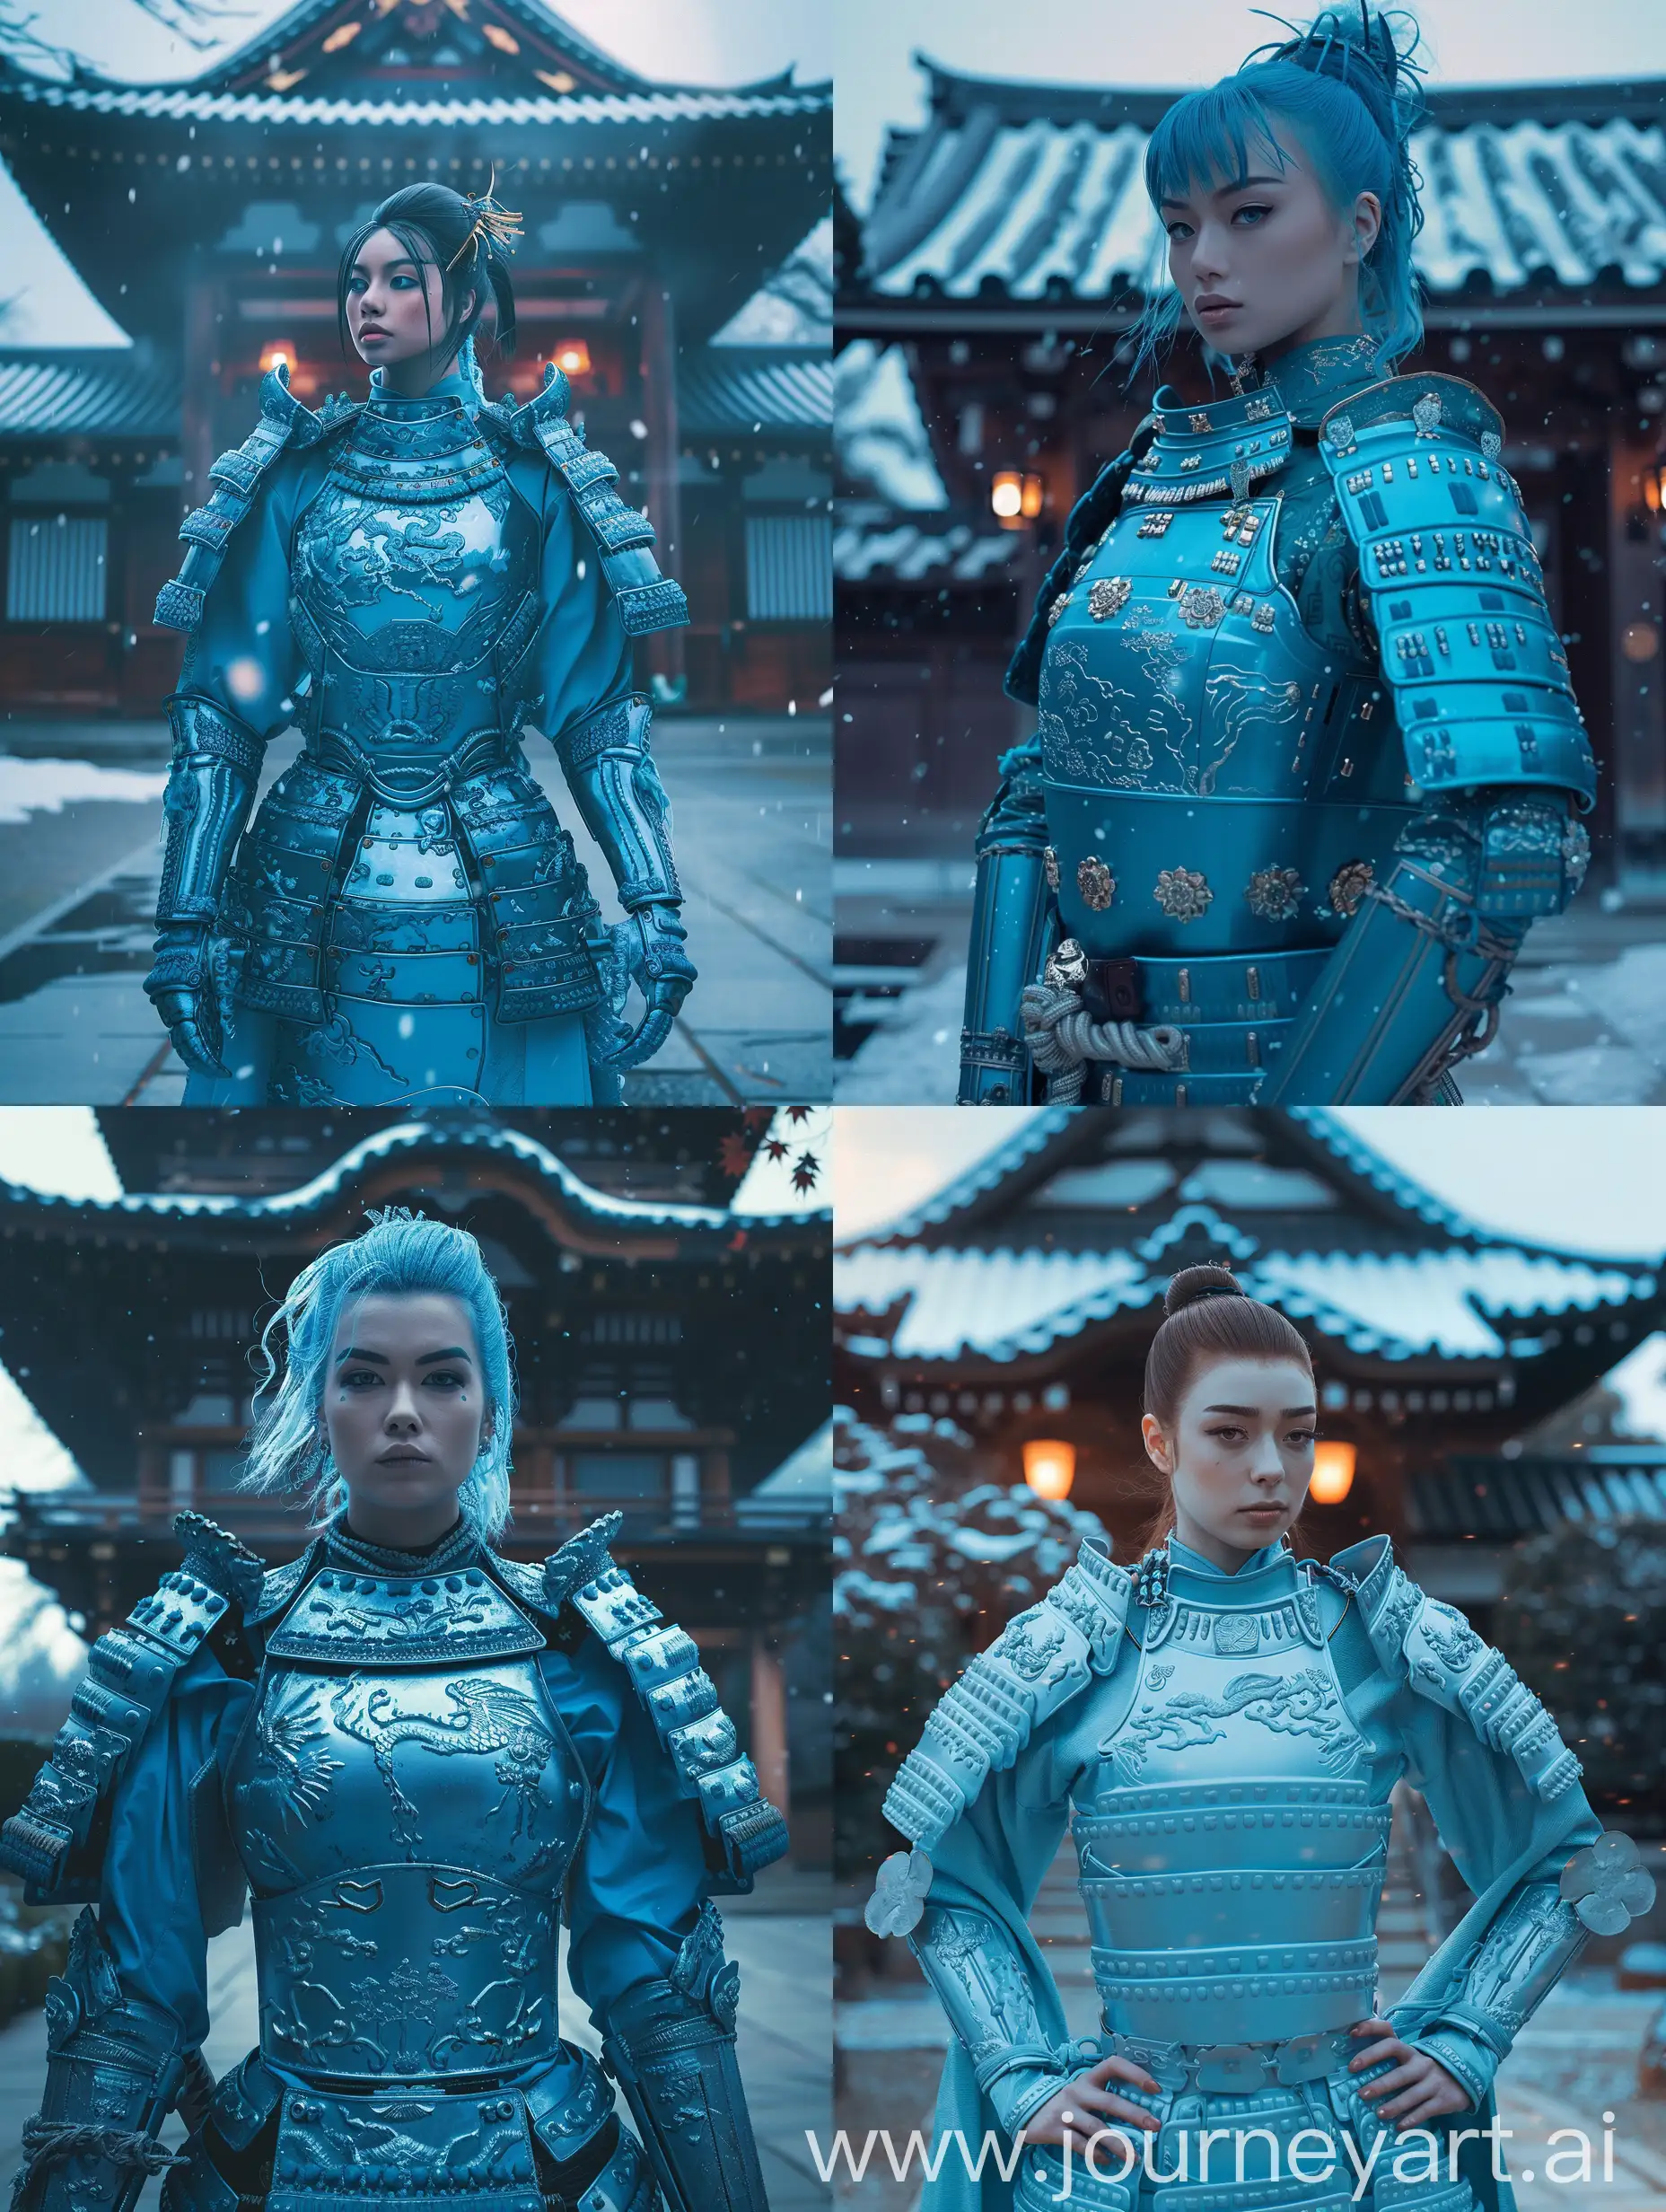 Character: A stunning female samurai warrior in bright light blue armor that shows elegance and strength.
Environment: A peaceful Japanese temple.
Background: A front view of a simple but beautiful Japanese temple.
Style: A rich fashion shoot blending the classic samurai look with a modern twist.
Photography Type: A cinematic fashion shoot that brings out the character of the blue-armored samurai.
Theme: A fashion shoot that combines old and new, centered on the blue-armored samurai.
Visual Filters: Enhanced with a Fashion Film Look-Up Table (LUT) for a richer look.
Camera Effects: Soft blur, haze, and natural light to bring out the blue of the armor.
Time: Set in a quiet evening with light snowfall for a peaceful atmosphere.
Resolution: High resolution to capture every detail.
Key Element: The main focus is the bright light blue armor, detailed to catch the light and stand out against the temple.
Details: The armor is detailed with traditional Japanese designs and scenes from samurai stories. It shines in the evening light, showing off the skill of the people who made it. The shape of the armor is highlighted, creating a beautiful image that brings out the spirit of the samurai.